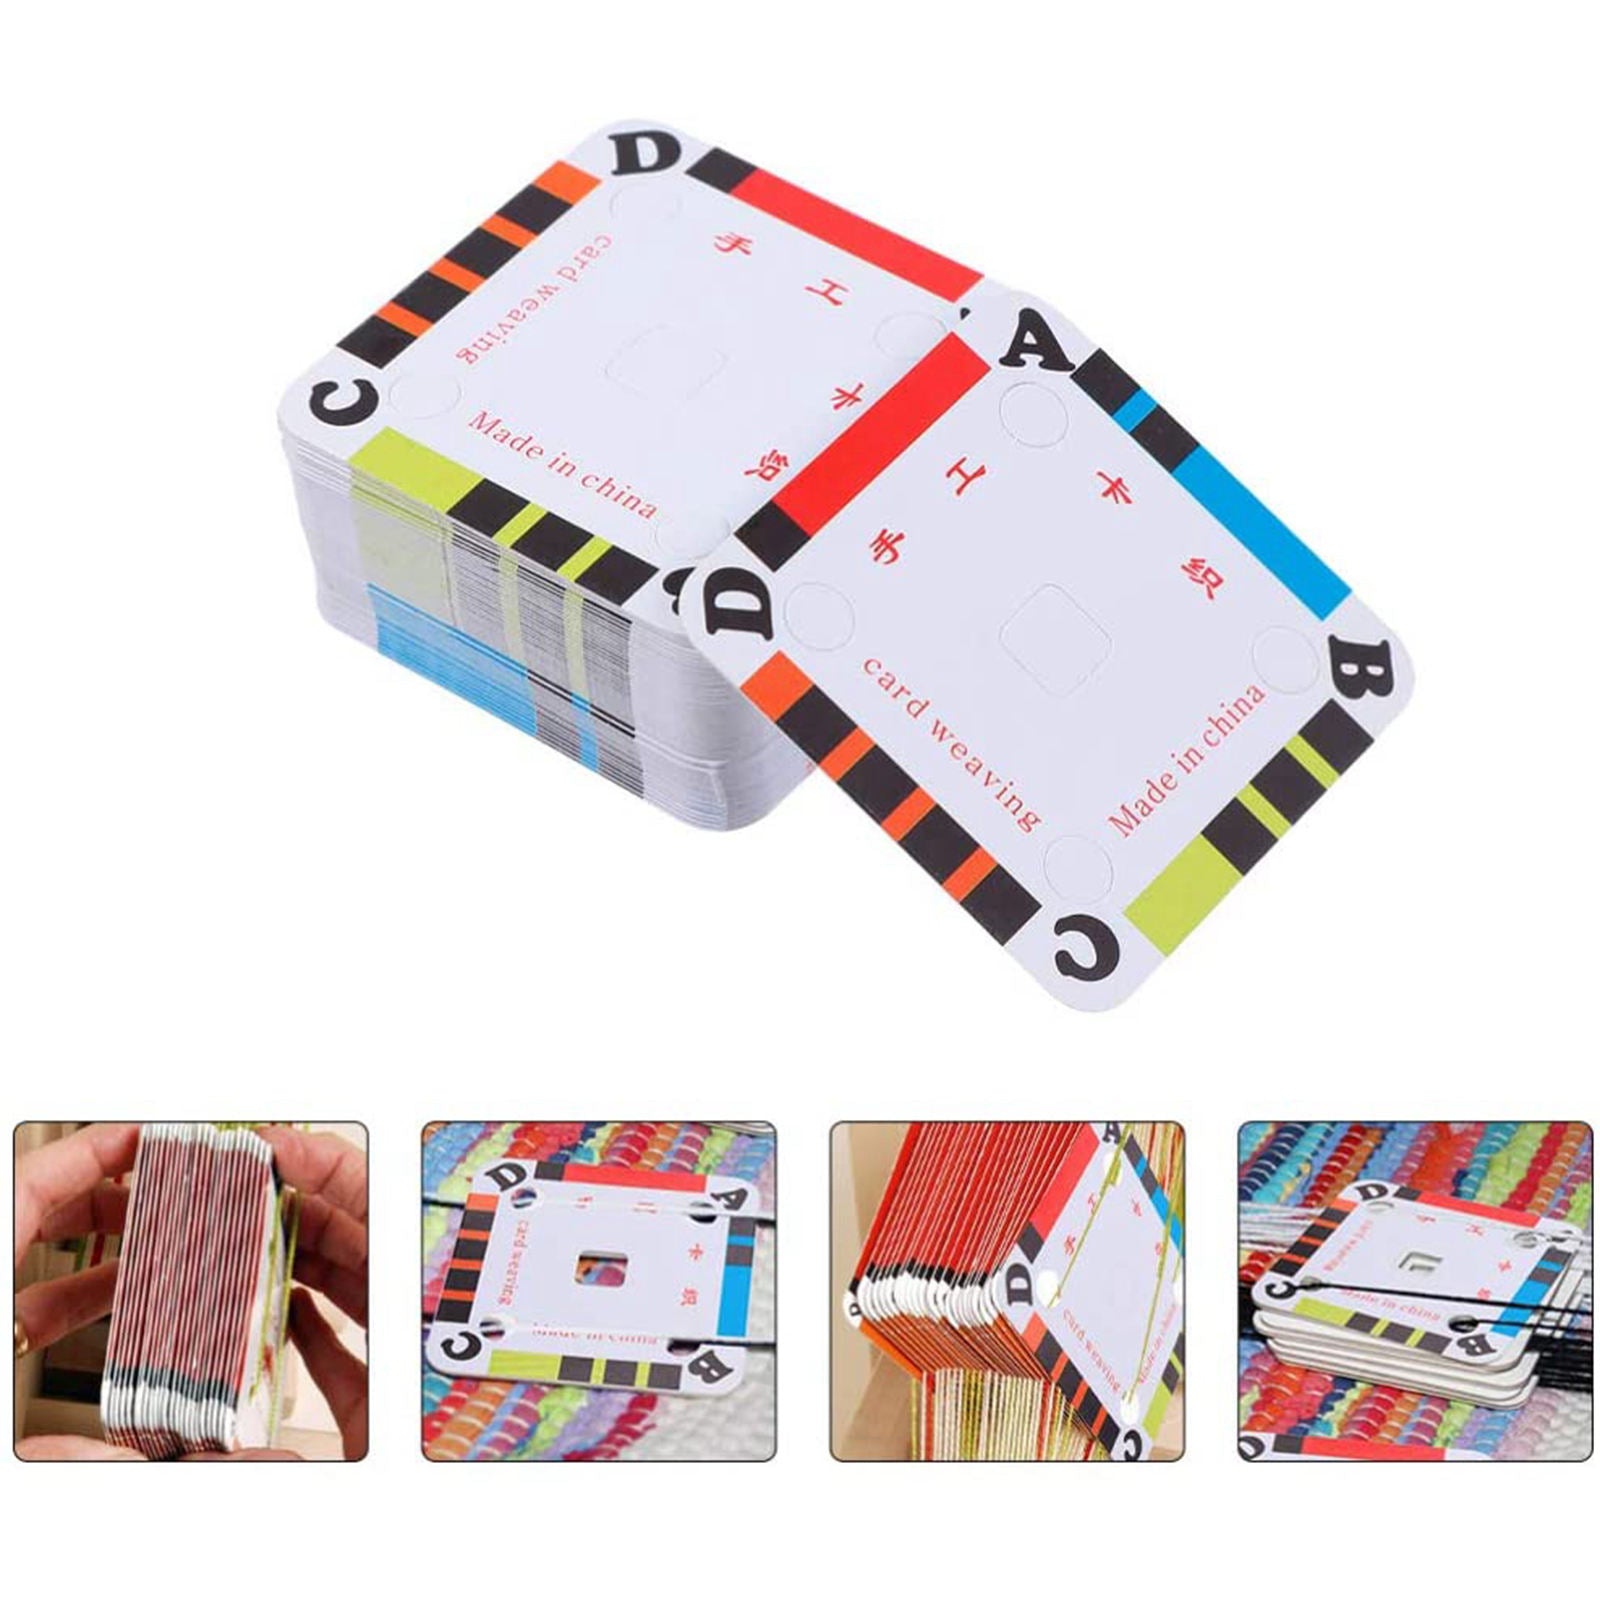 Pack of 100 Handy Weaving Cards Tablet for Loom Craft Weaving Accessories